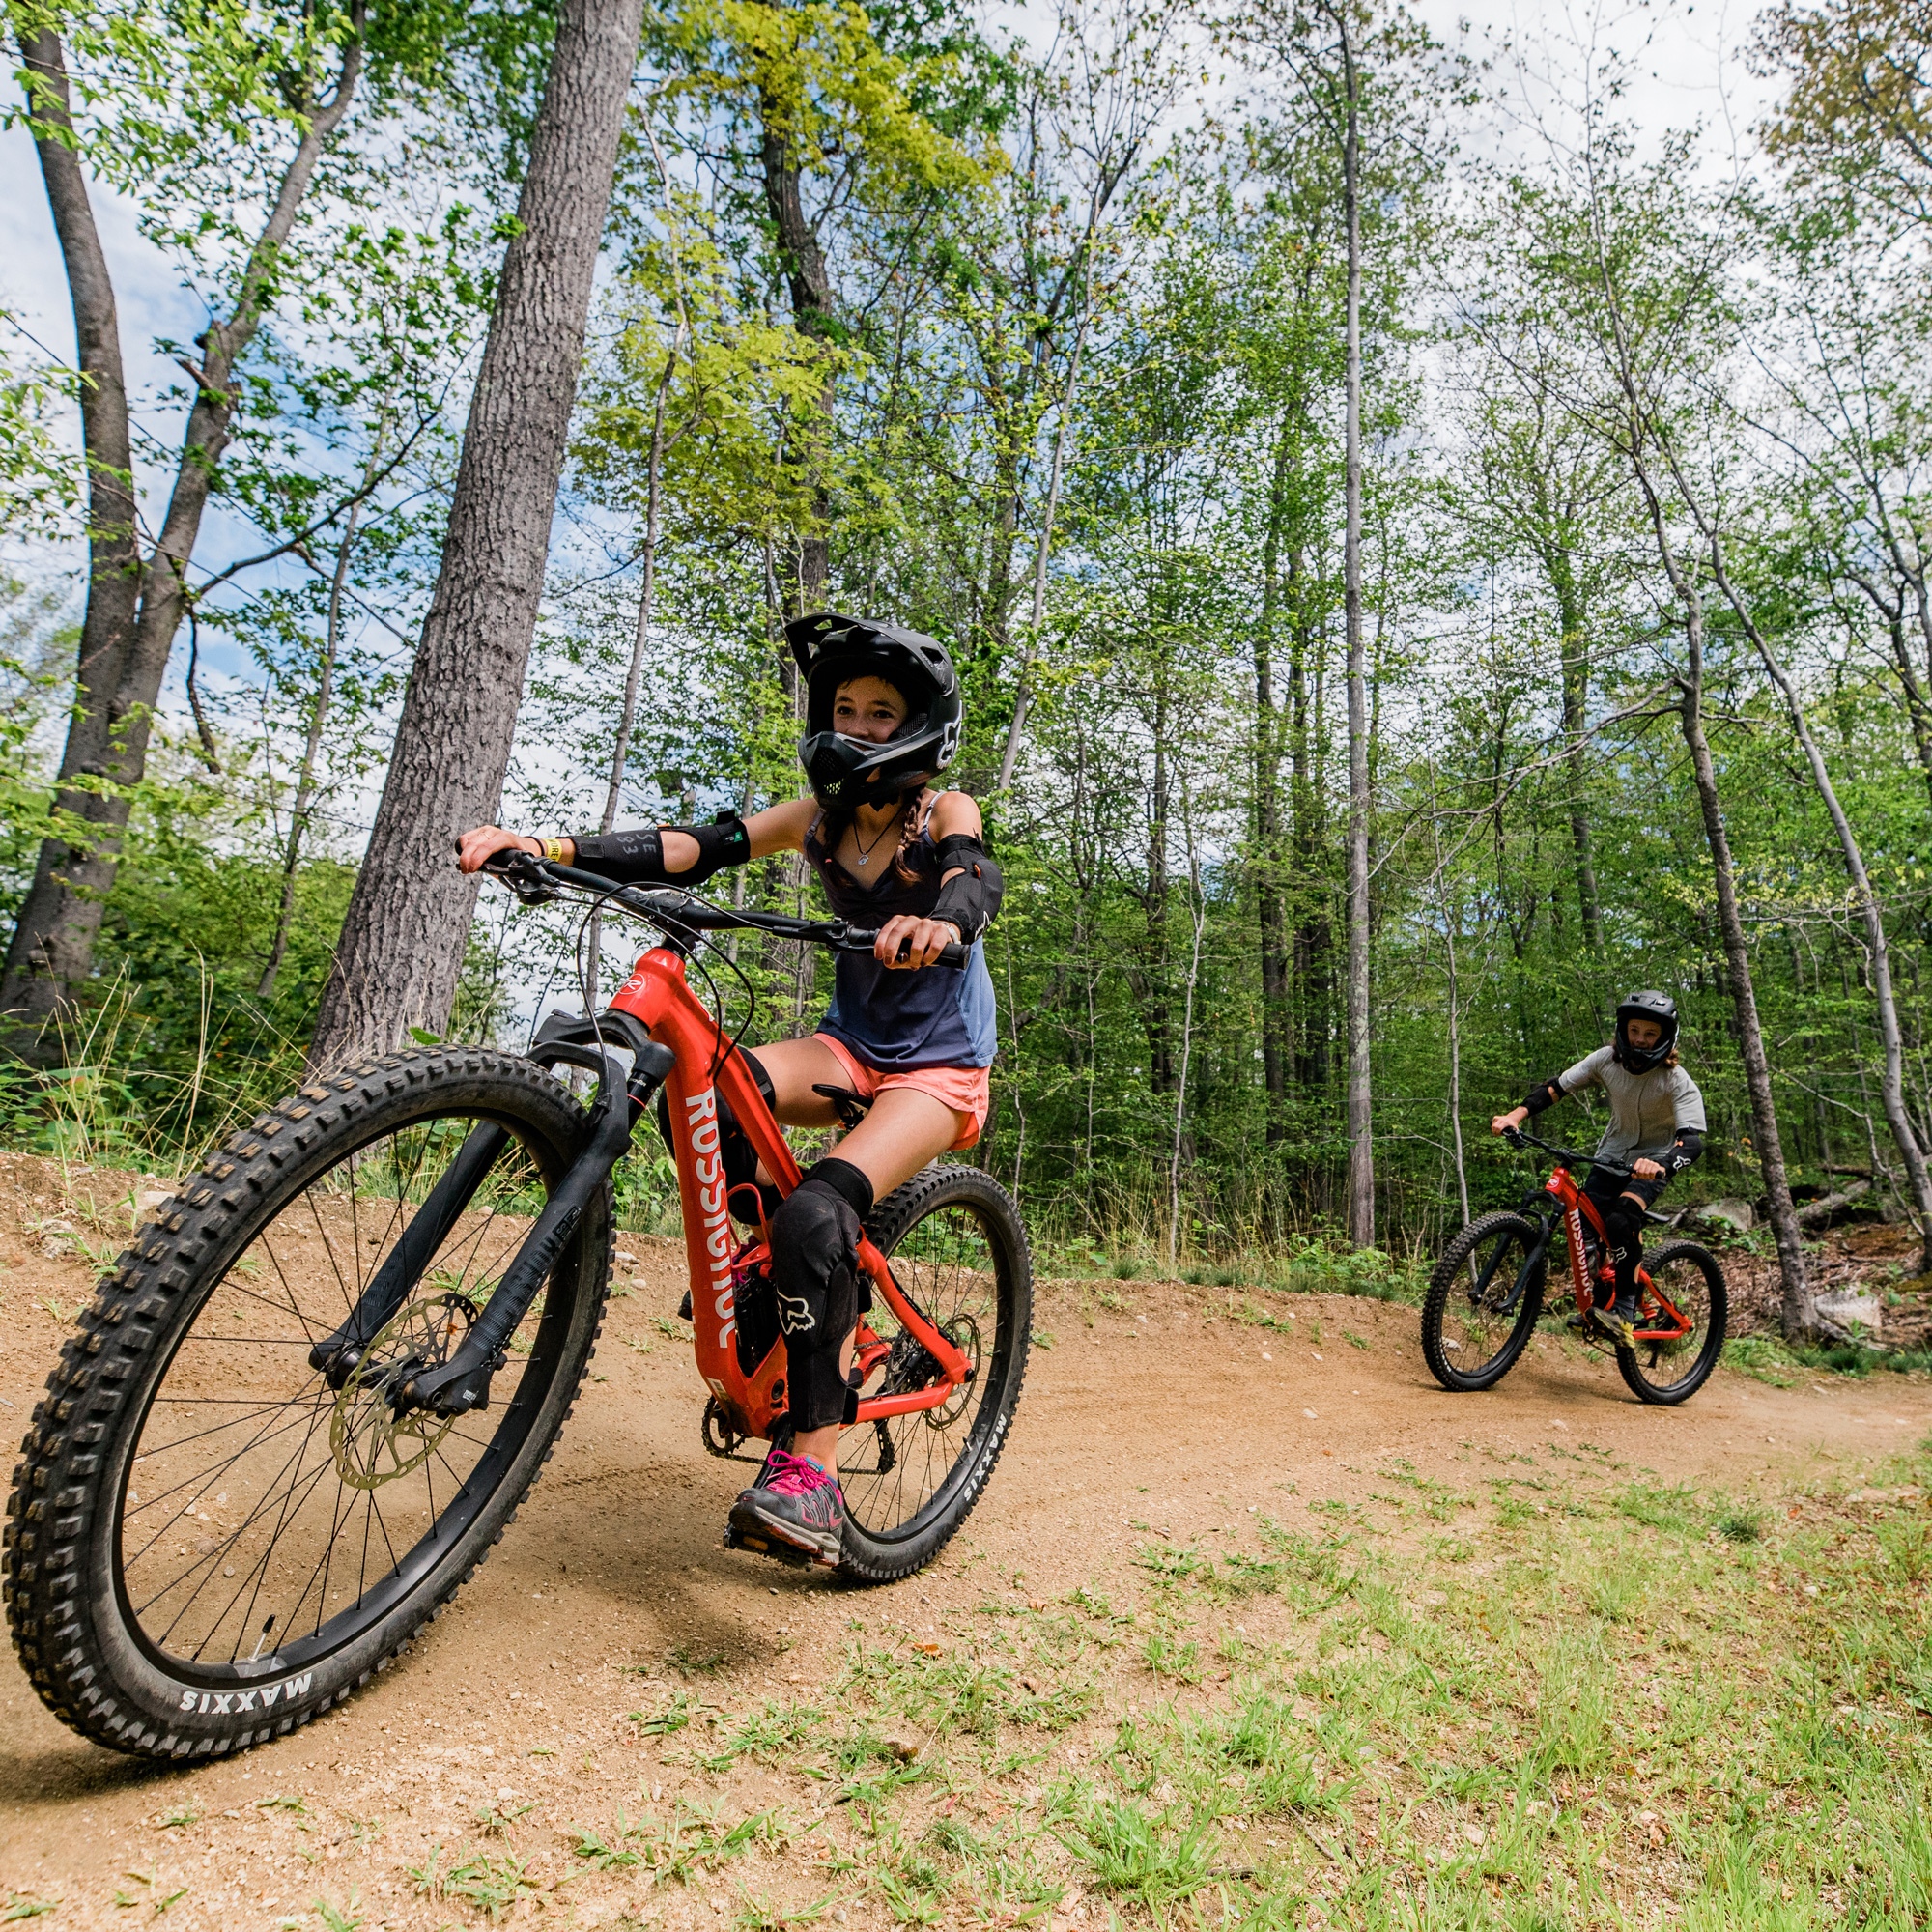 Family riding flow trail coming around curve